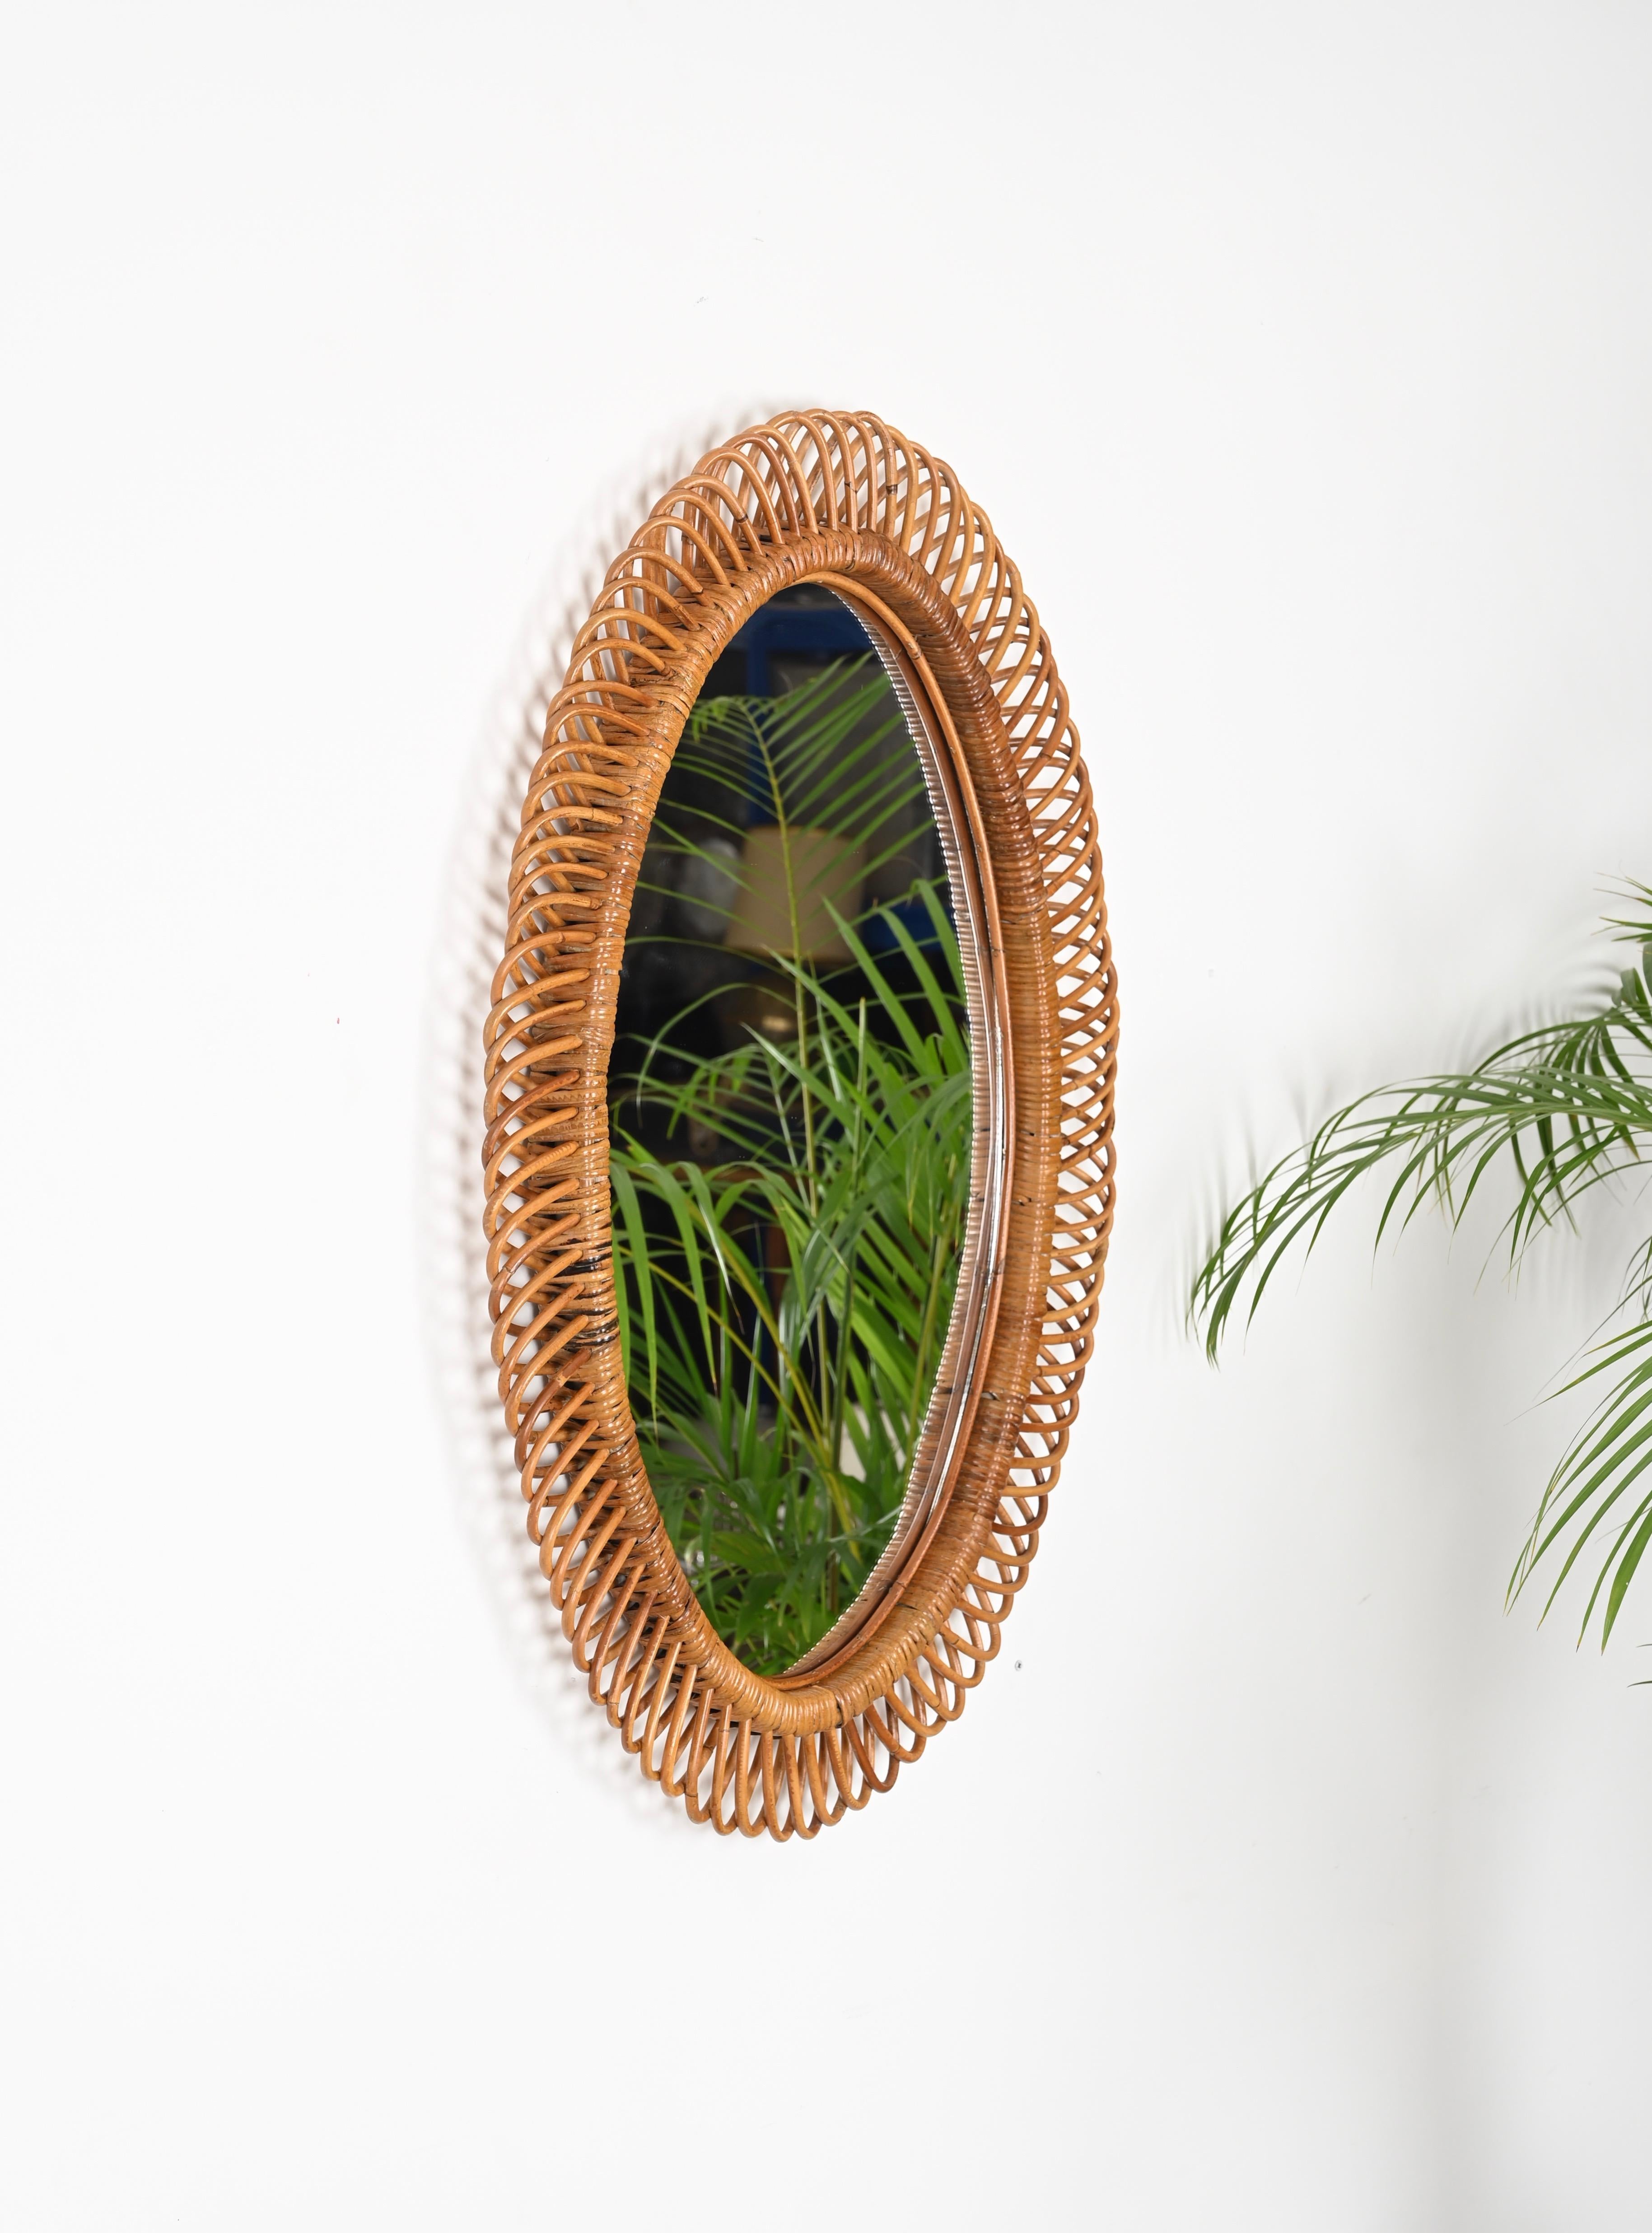 Italian Franco Albini French Riviera Large Oval Mirror in Rattan and Wicker, Italy 1960s For Sale